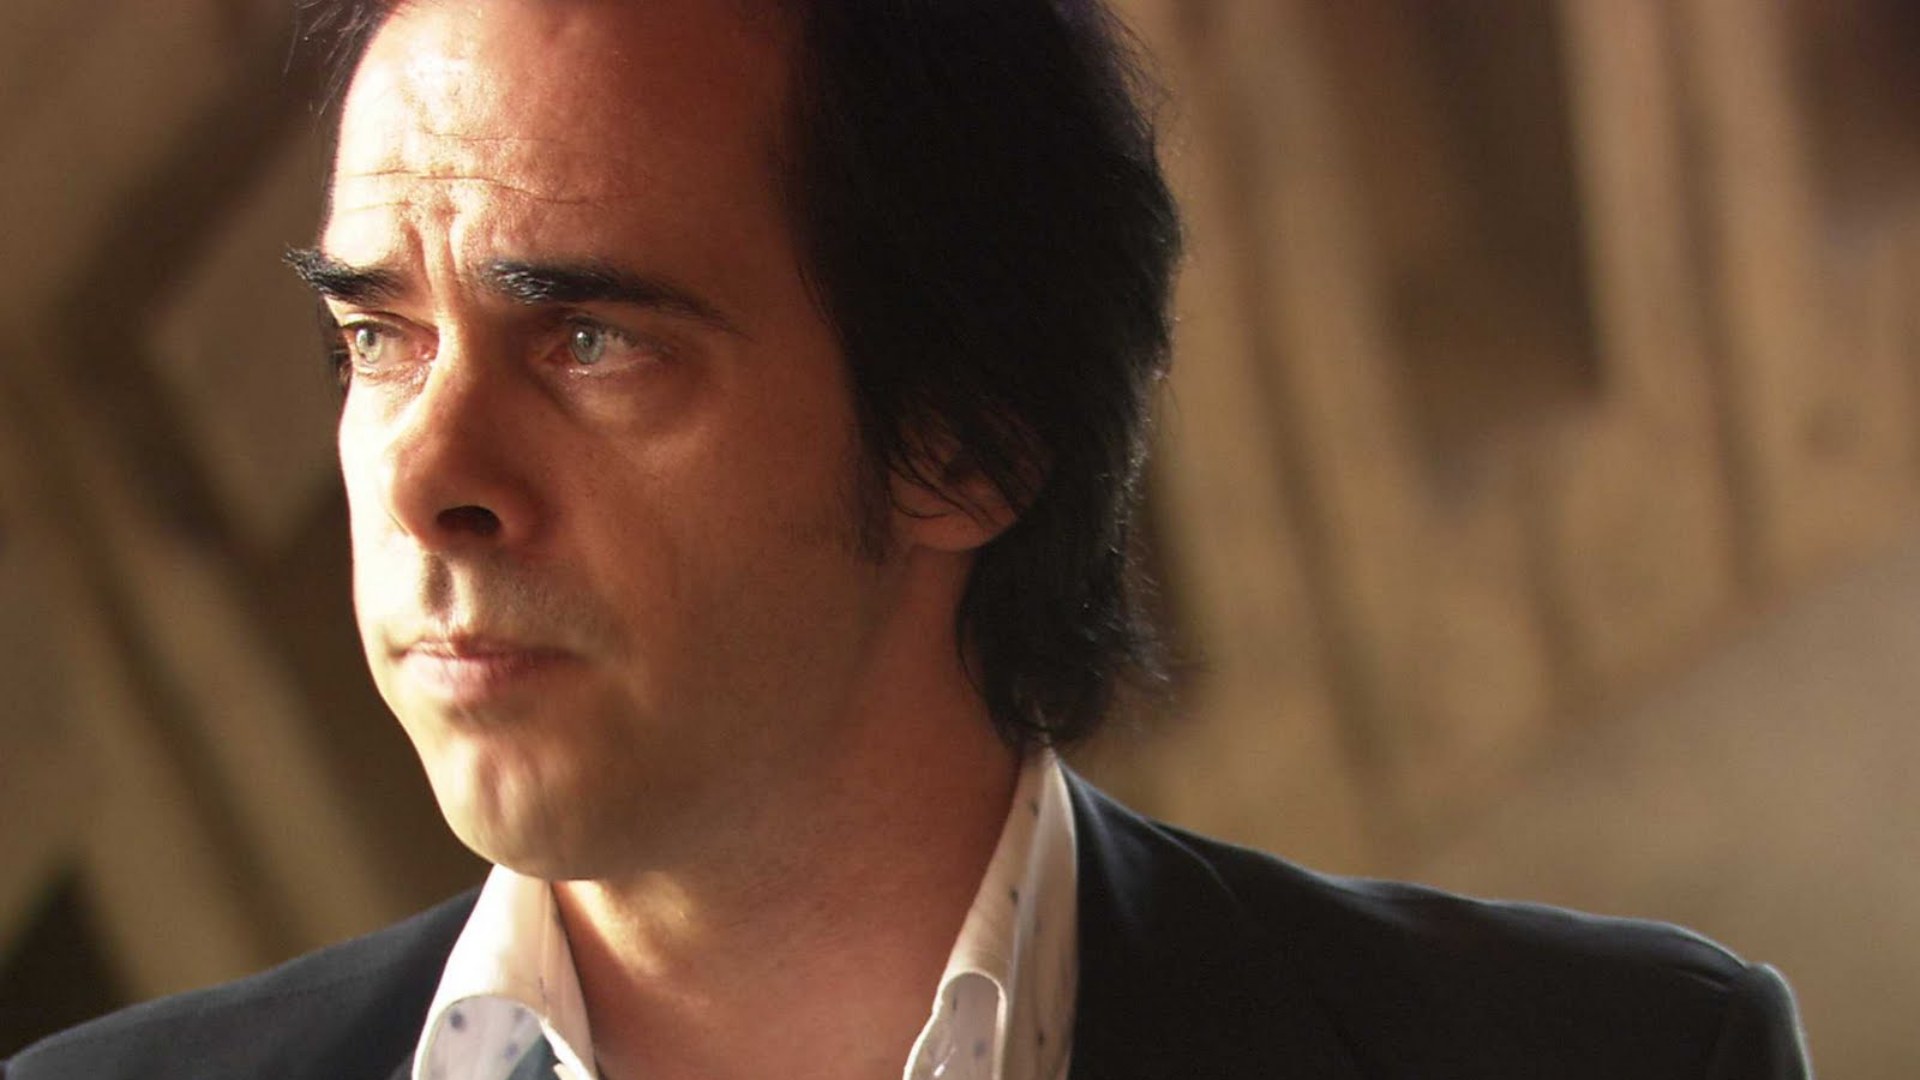 The Proposition No. 1 av Nick Cave